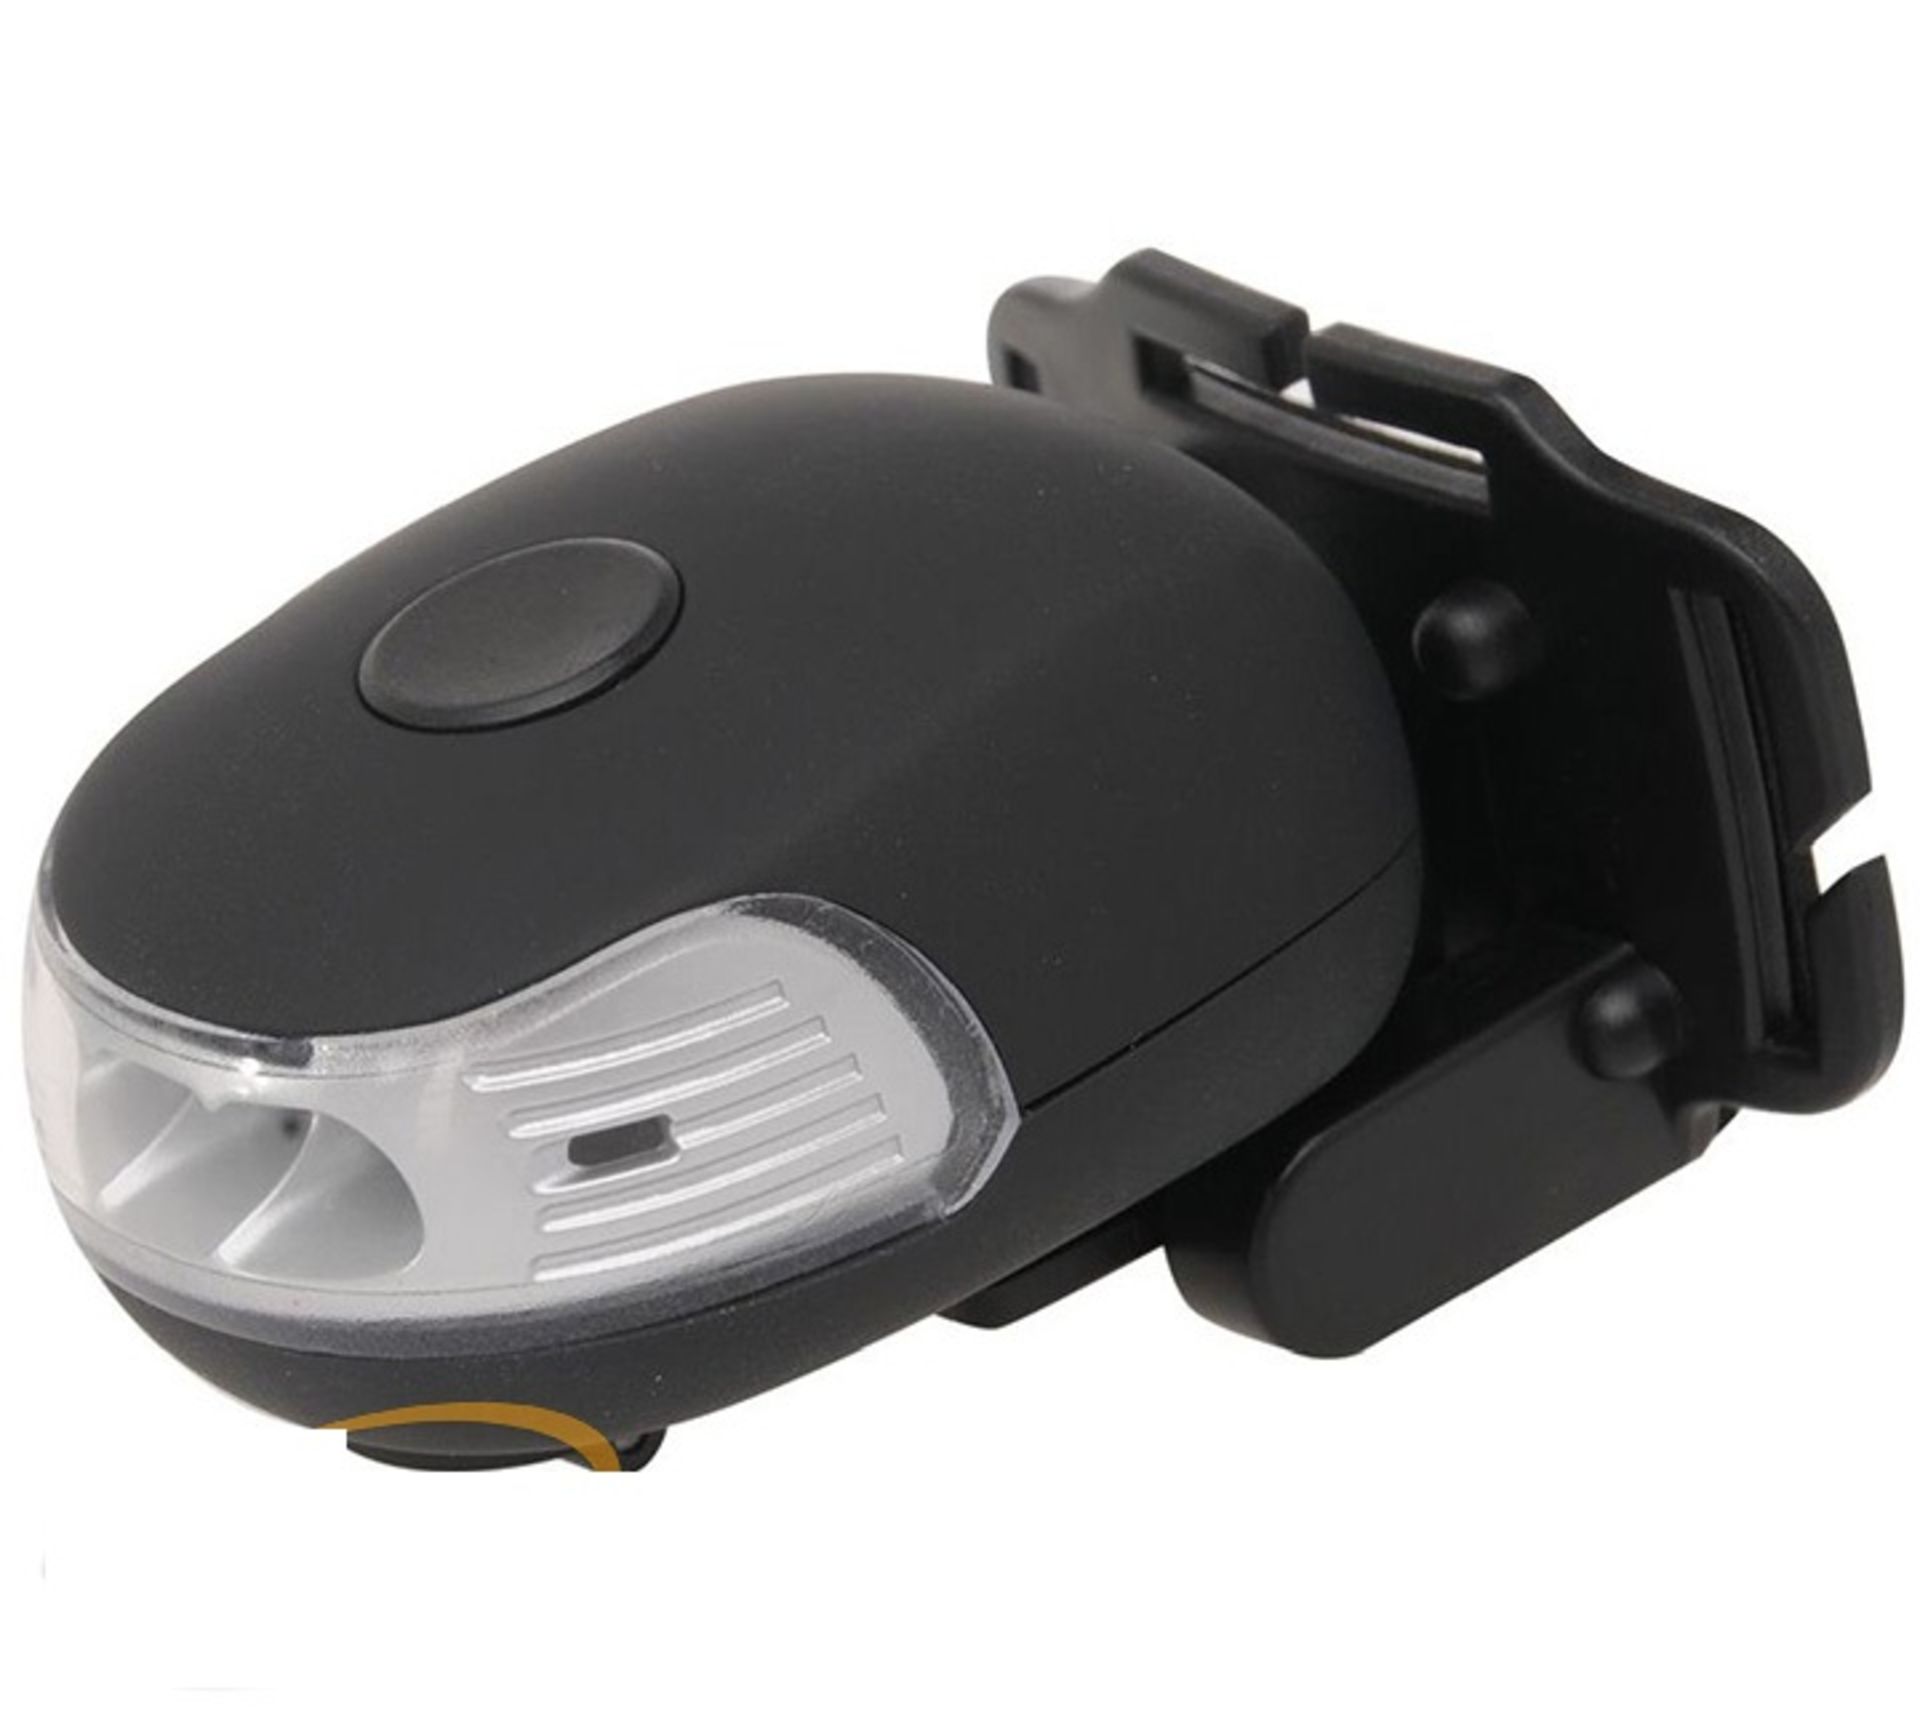 V Grade A Tritronic Head Mounted Lamp With Three LEDs (Wind Up No Batteries Required) RRP £19.99